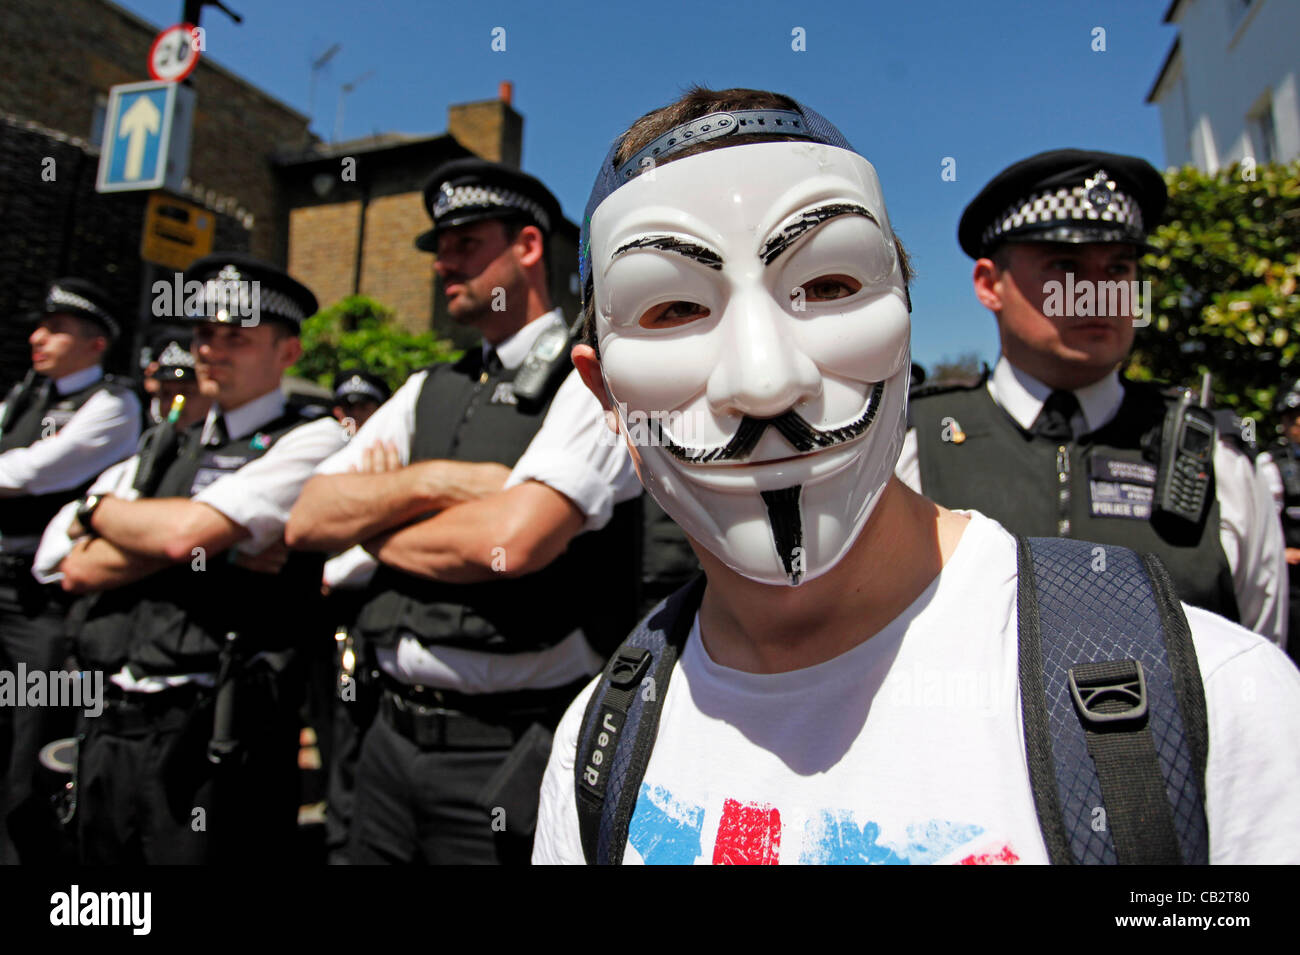 Download preview image - putney-london-uk-saturday-26th-may-2012-anonymous-with-protestors-CB2T80